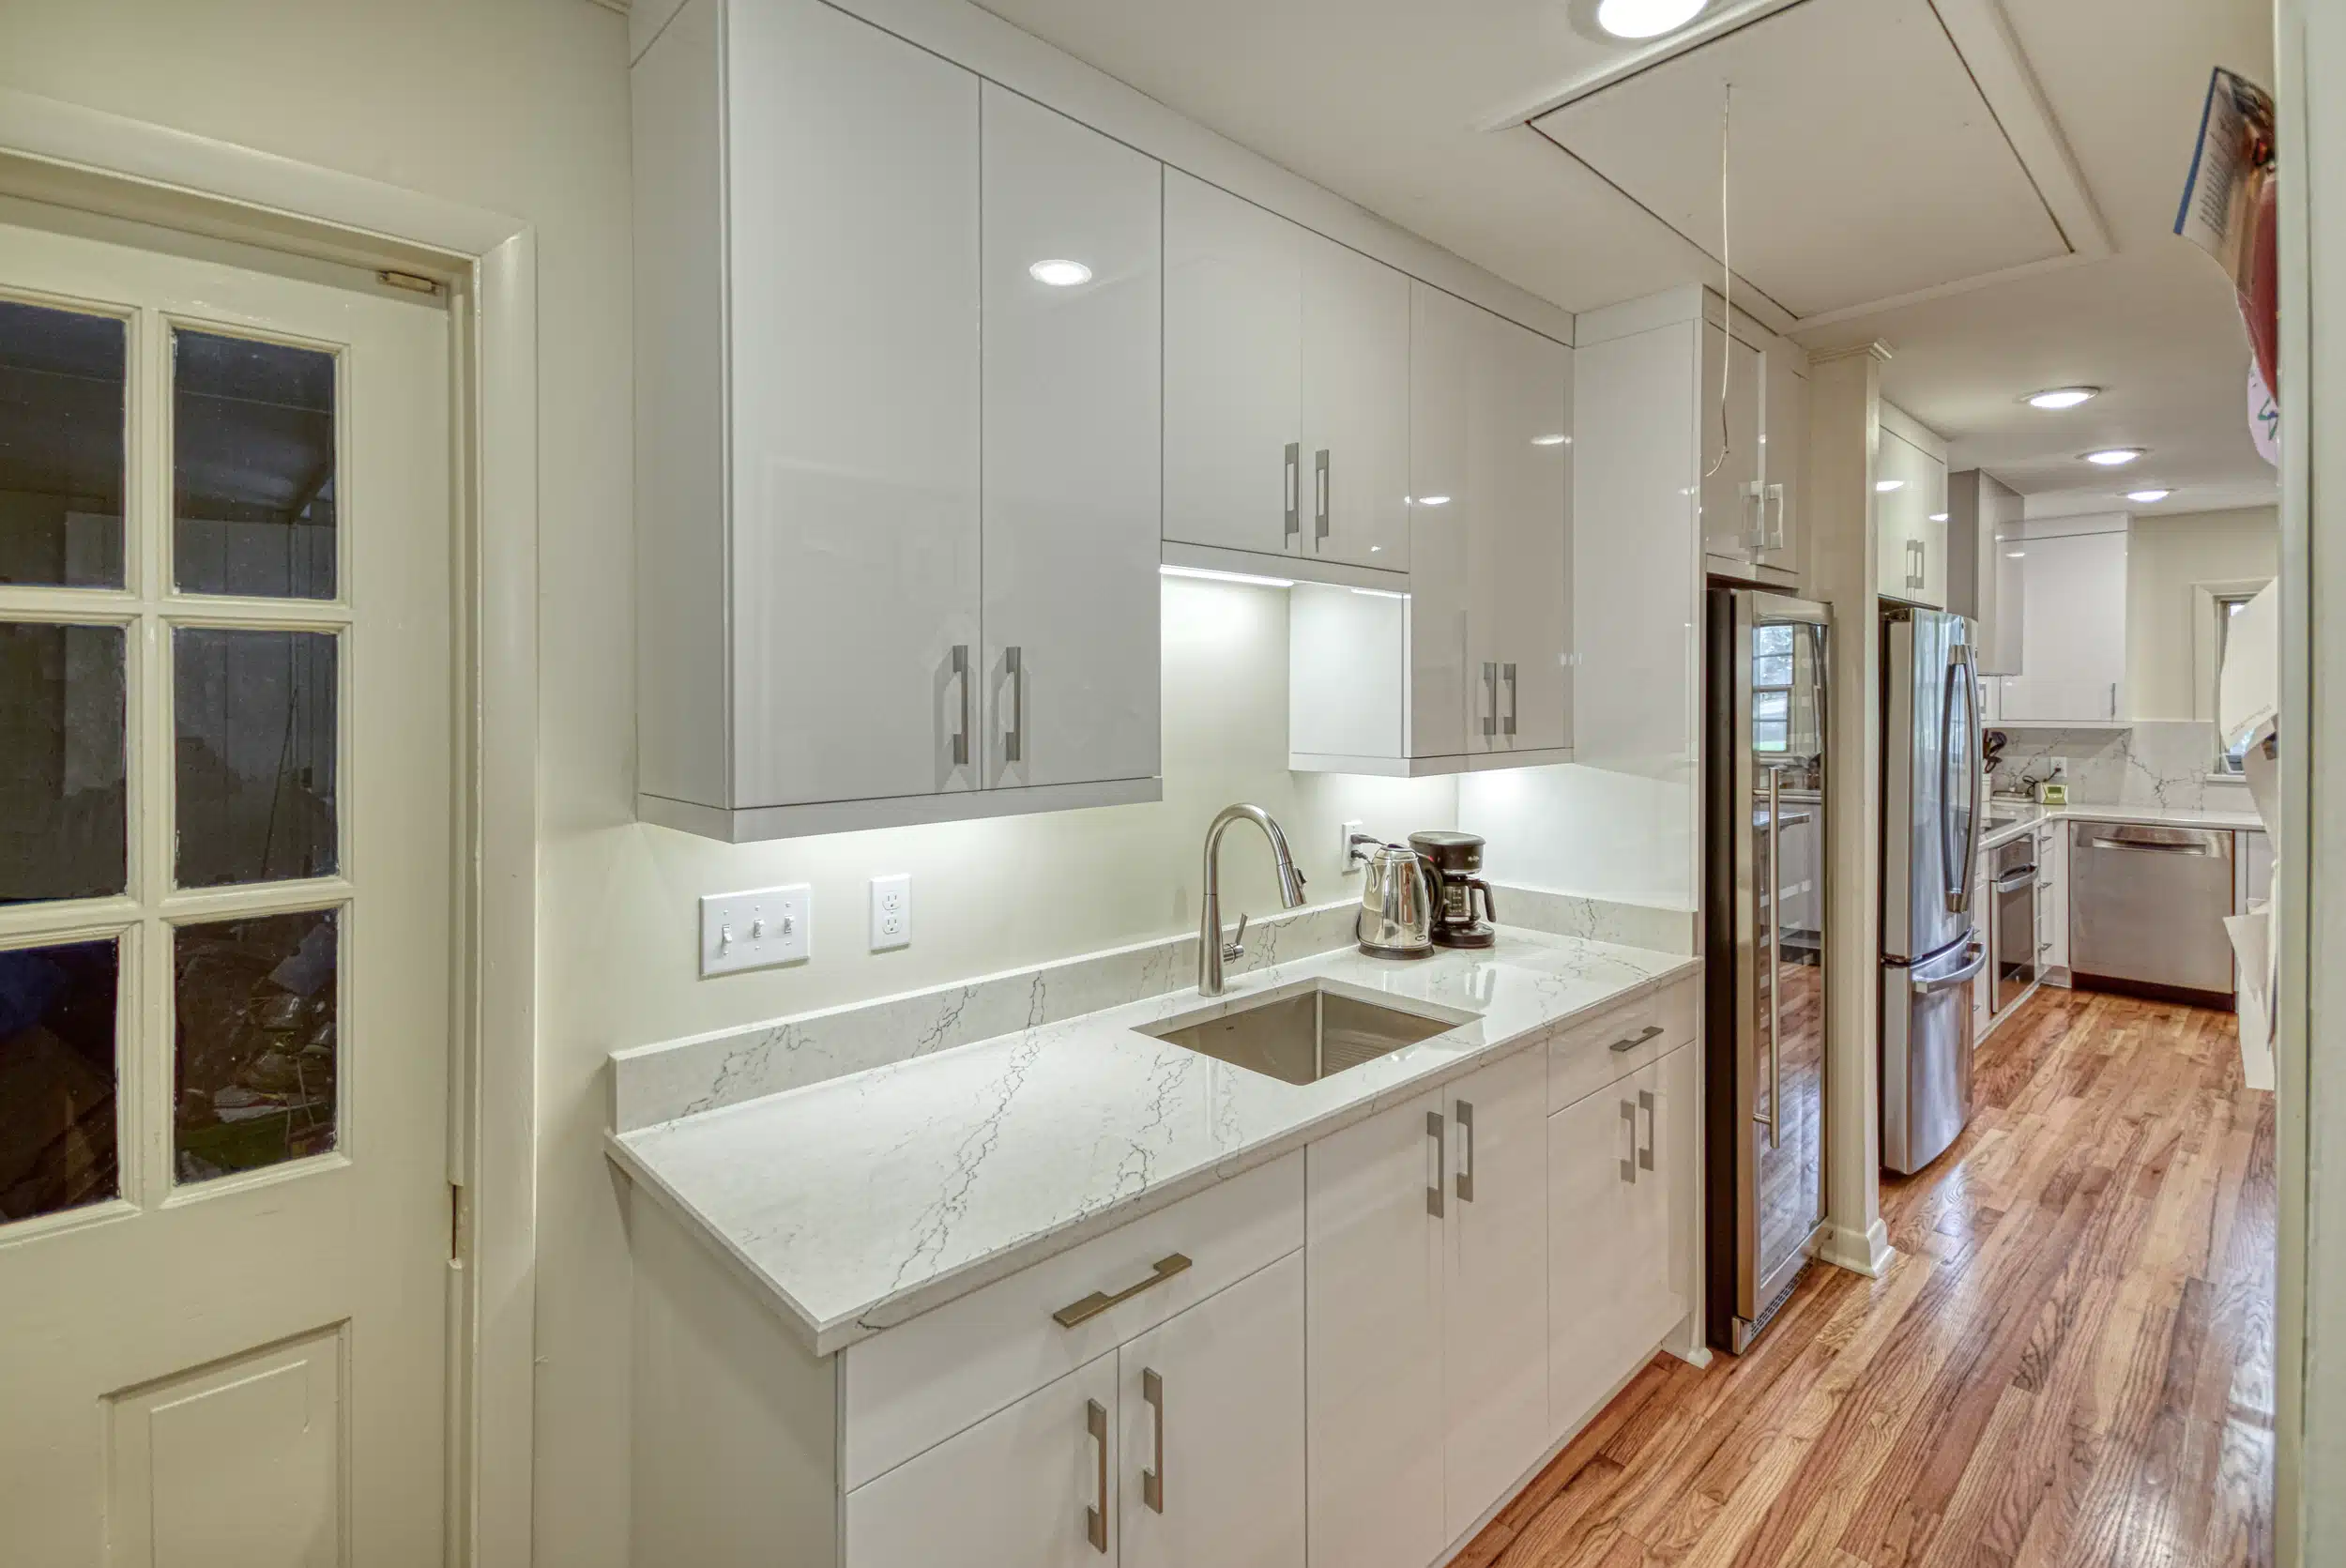 Butlers pantry with white cabinets and quartz countertops